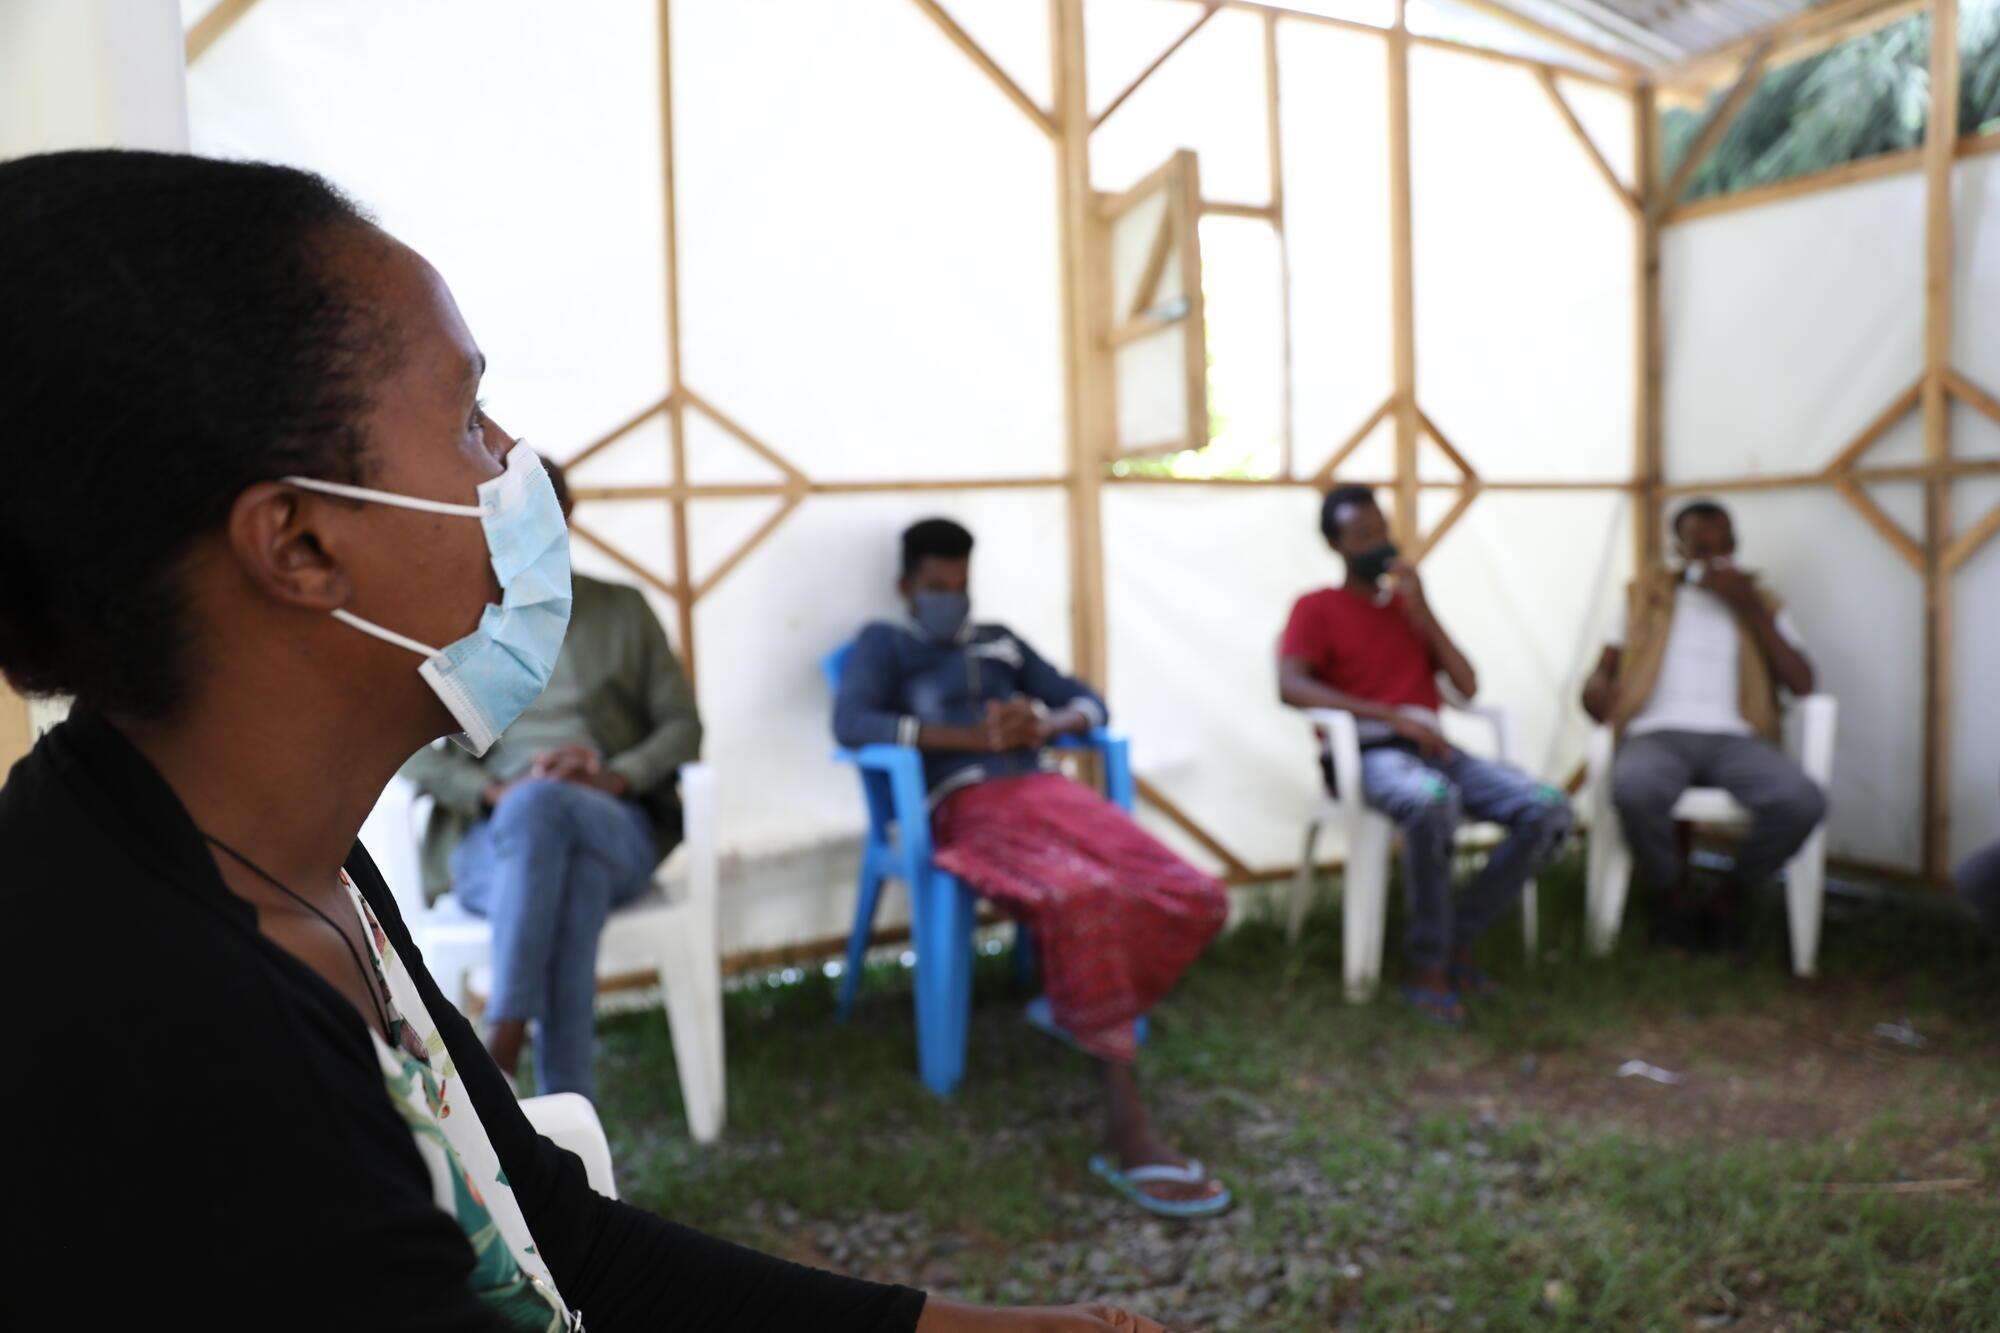 Renewed hope: Caring for deported migrants in Ethiopia